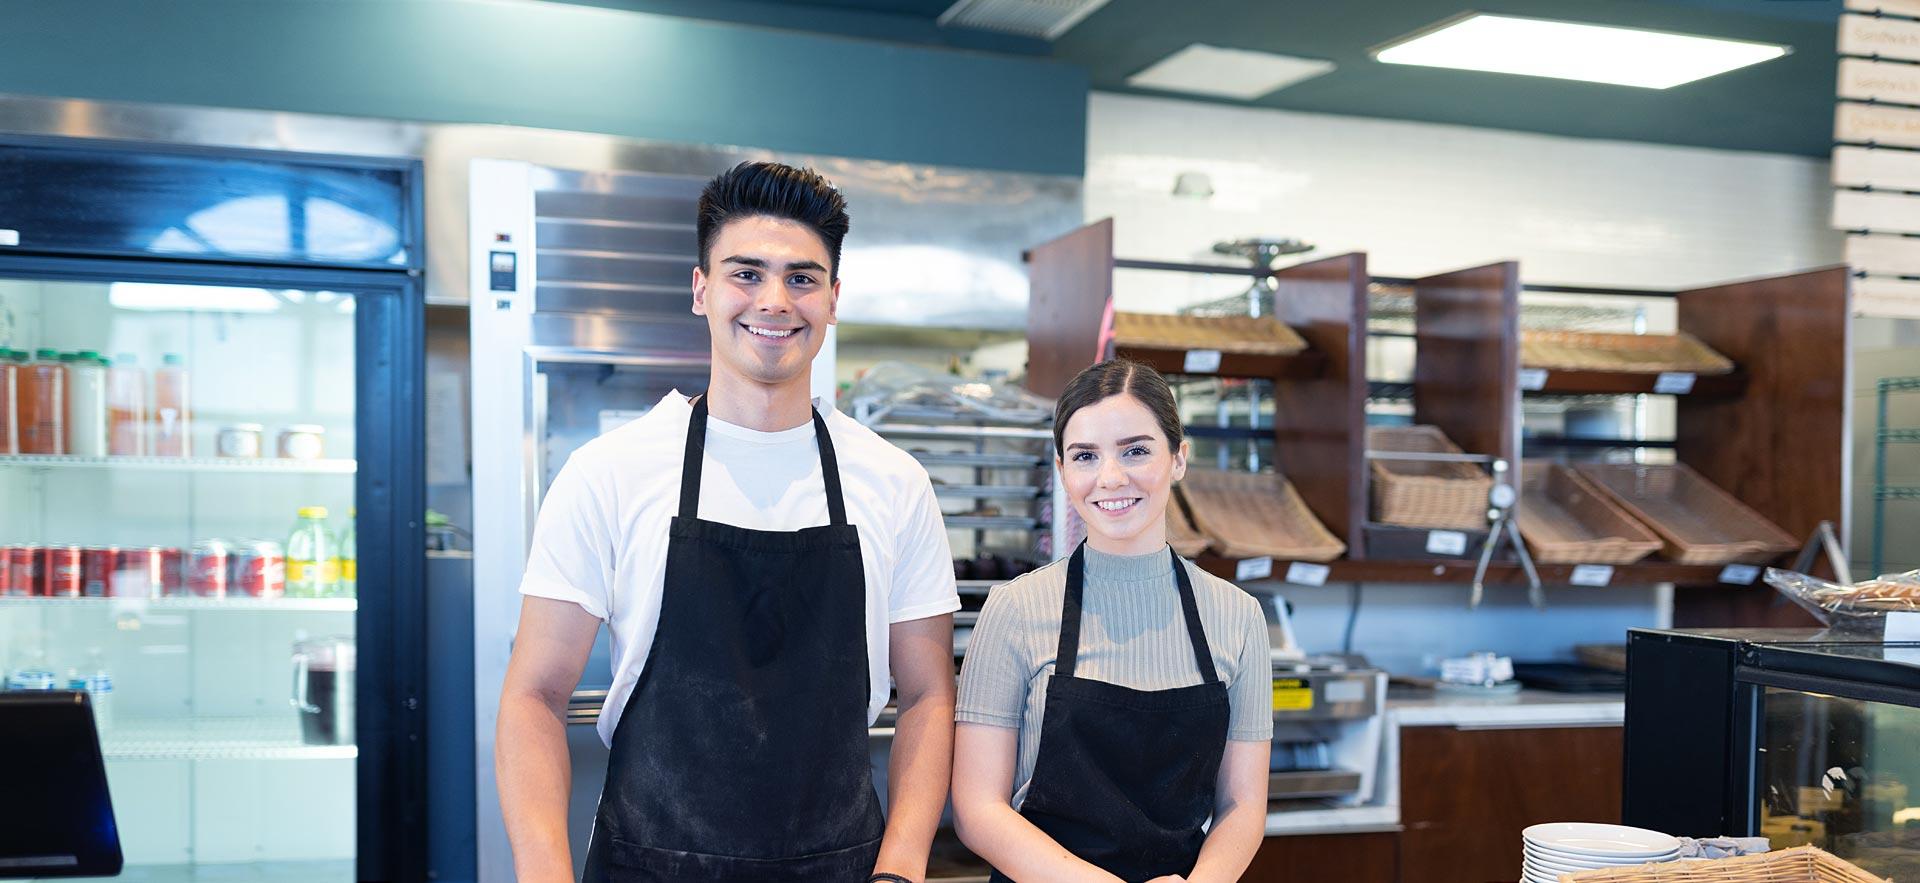 Smiling male and female food service worker.